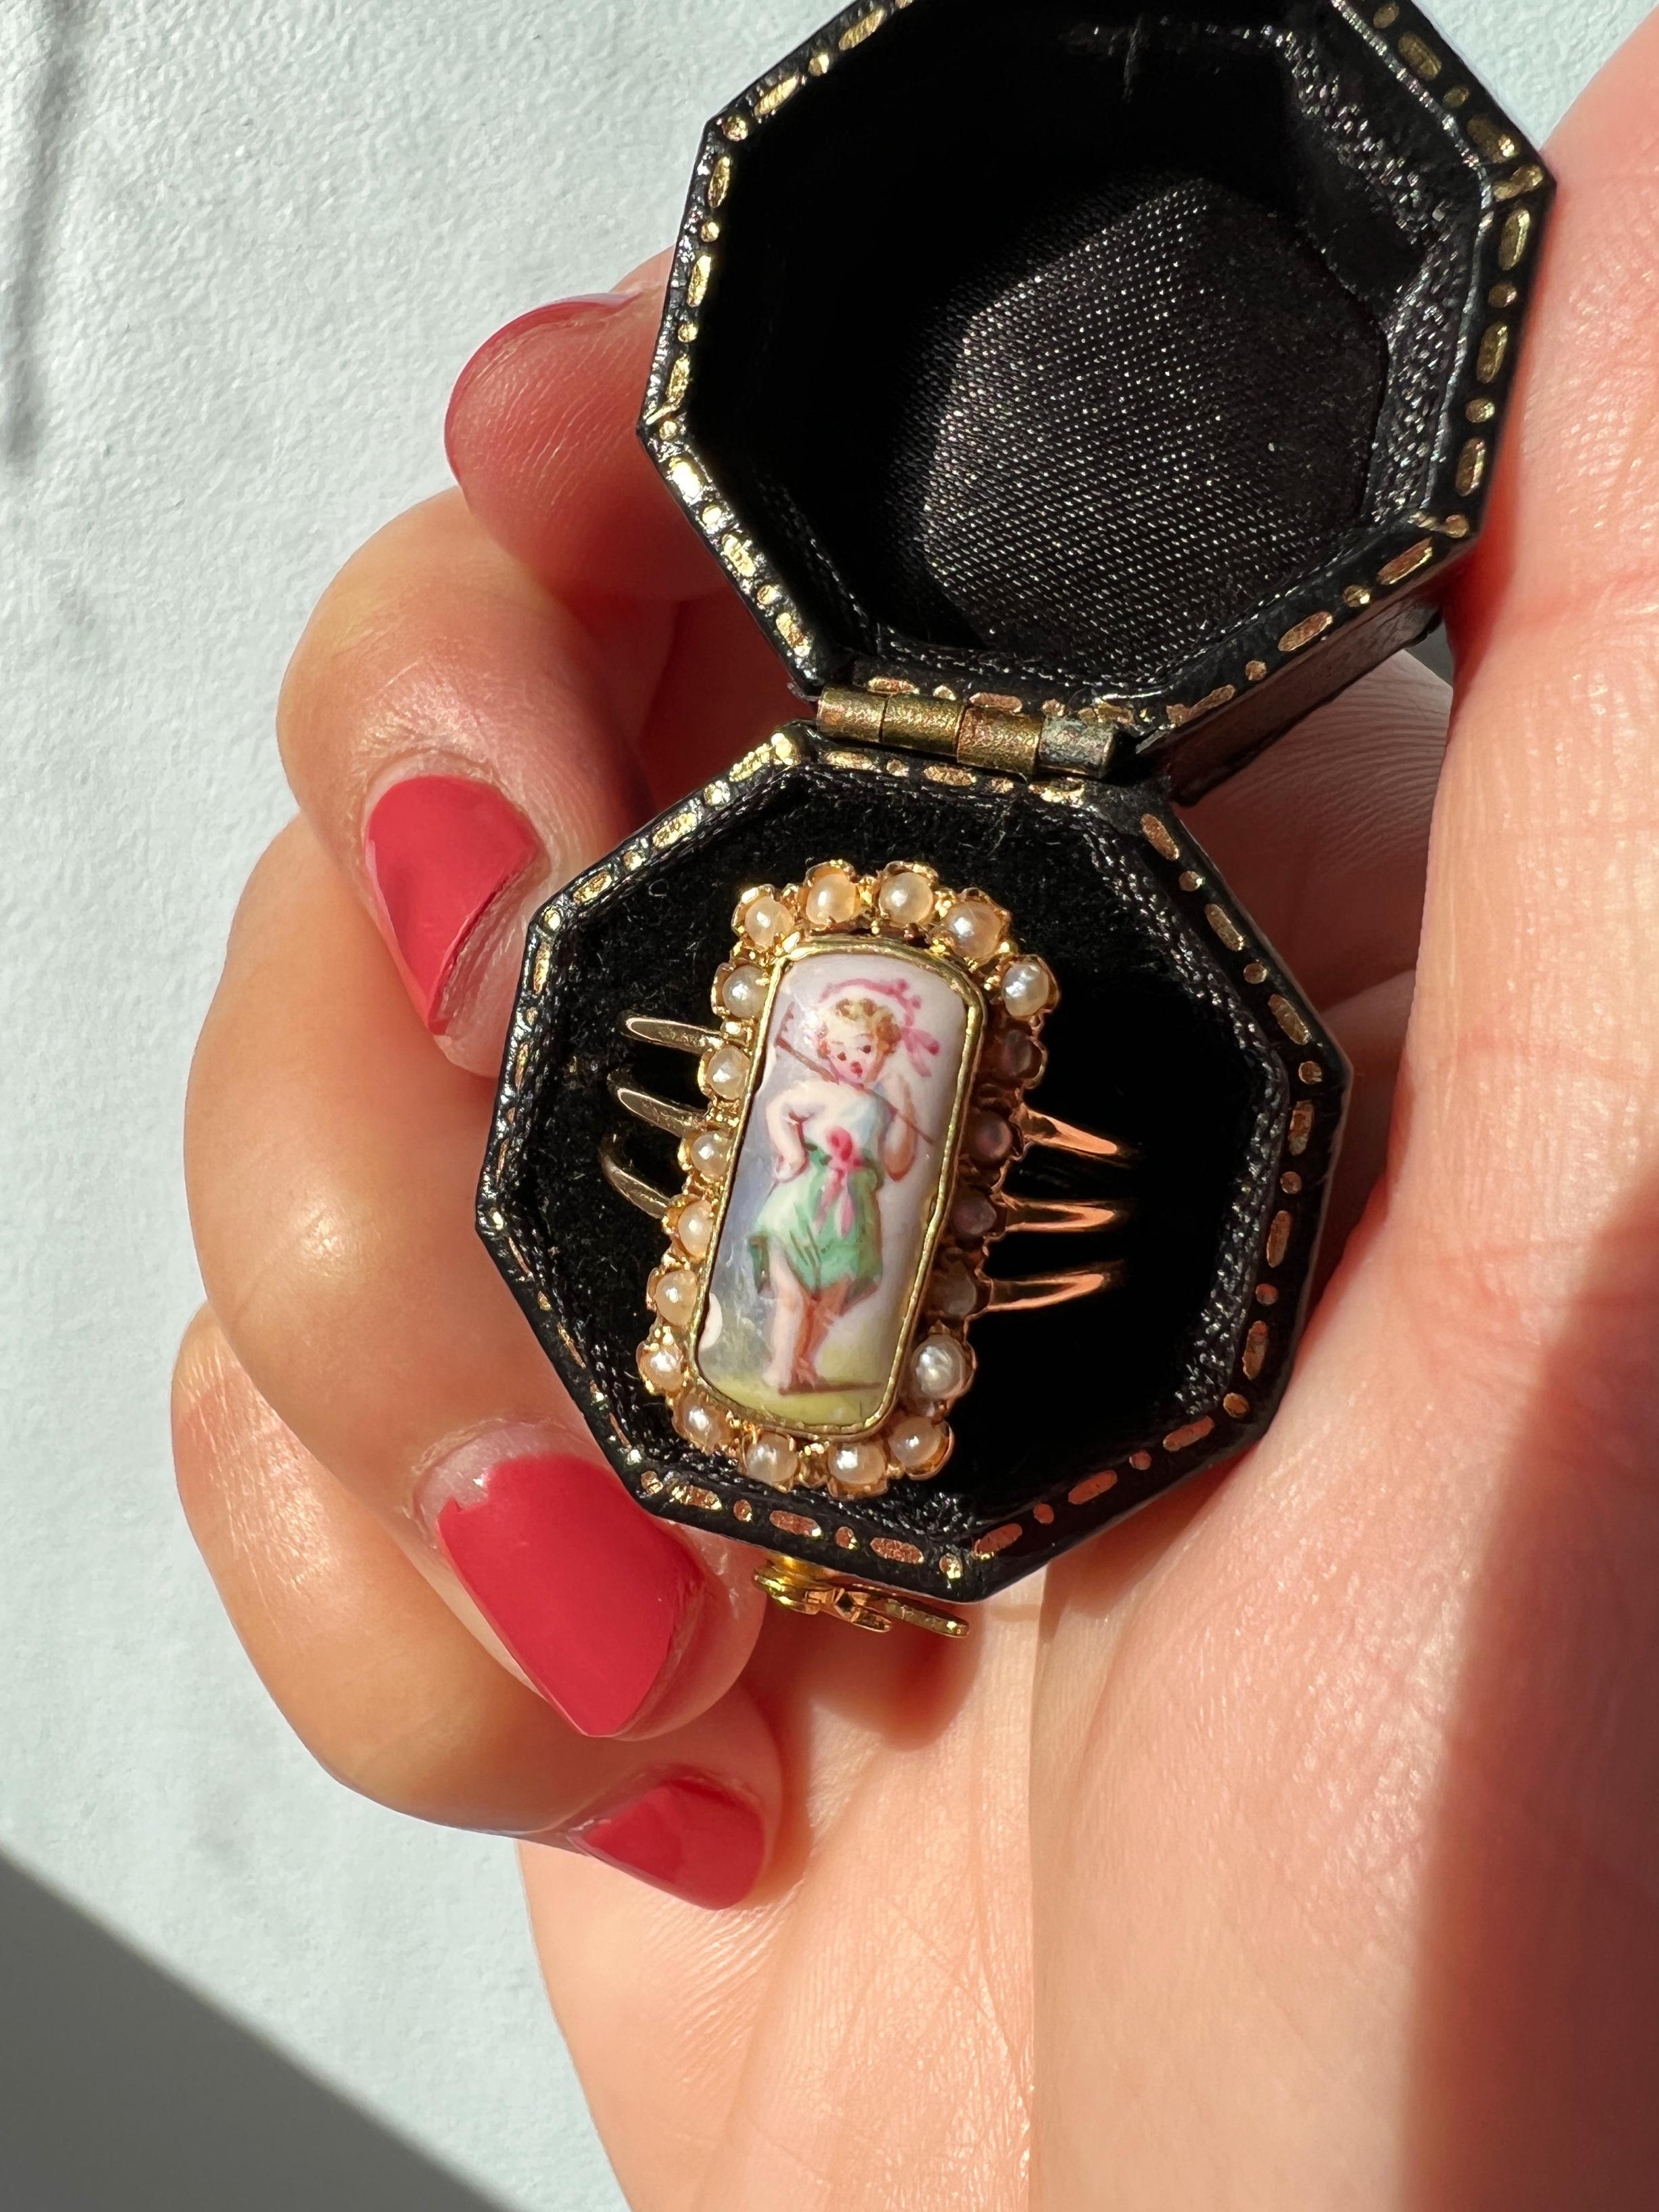 For sale a sweet Victorian era 18k gold enameled ring, featuring a hand painted portrait of a young girl. The colors of the miniature remain vivid after hundreds of years and the little girl looks very joyful. We love the details on the painting